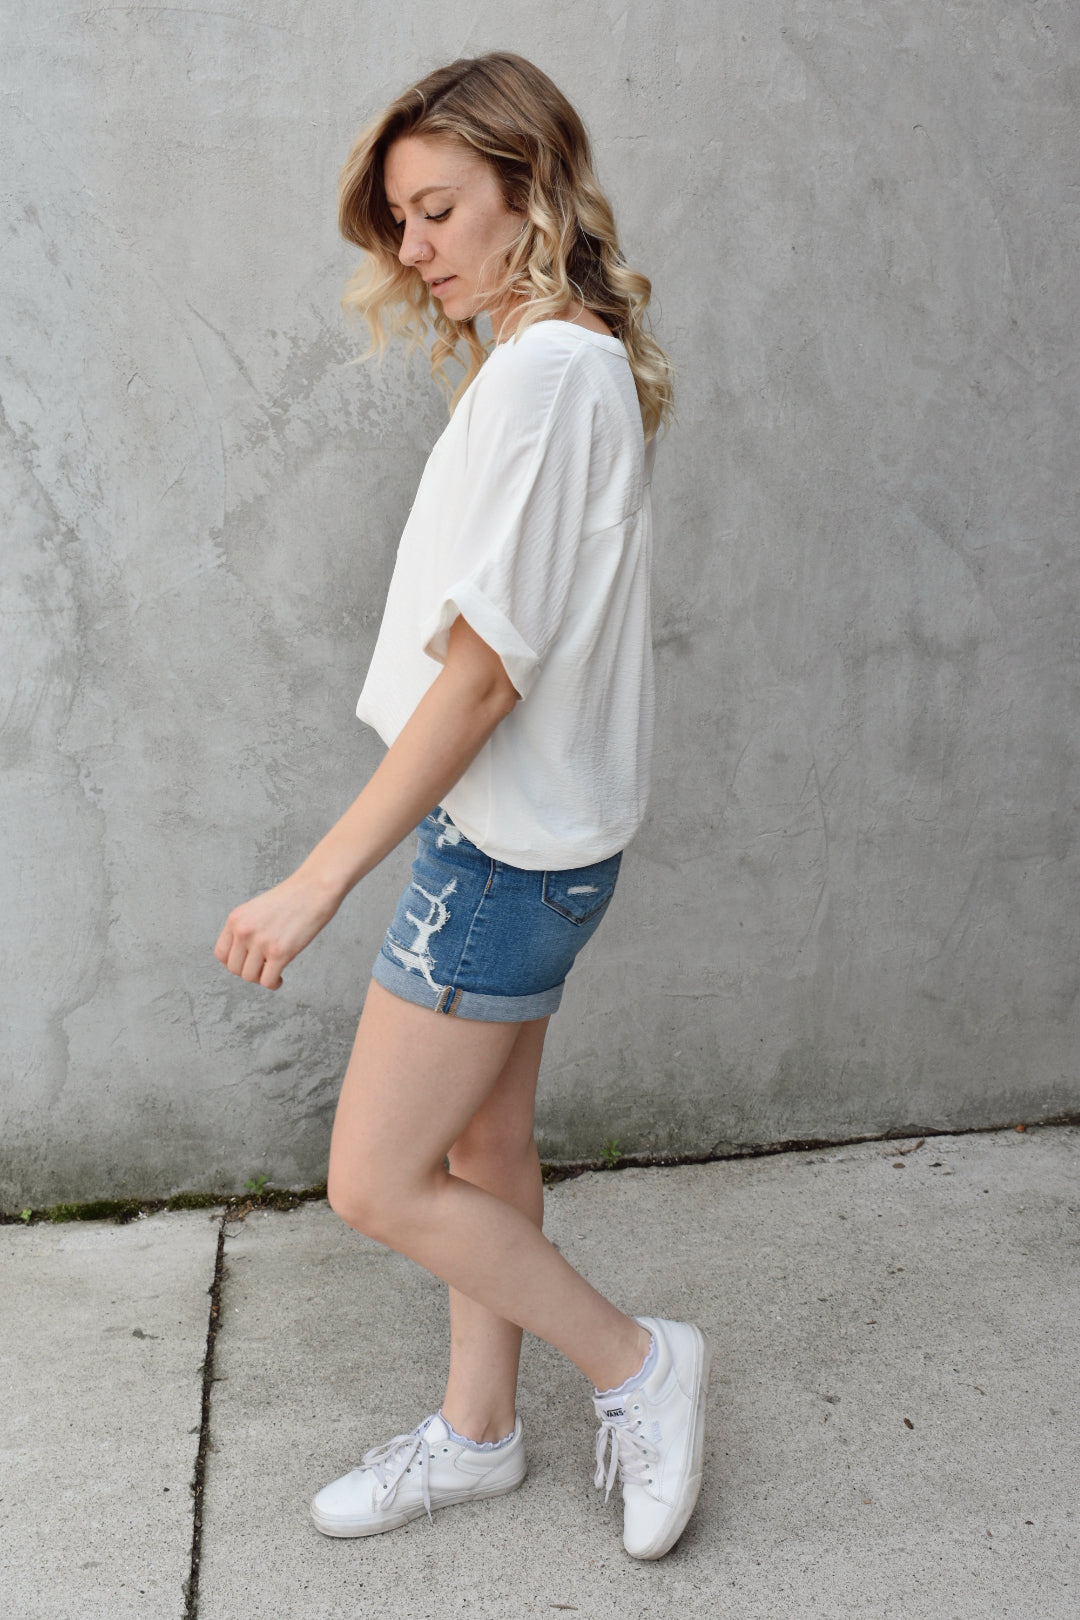 lightweight full length white loose fitted blouse. Has a round neck with a V-neck placket detail front, the dolman short sleeves feature cuff bands. The brand is Mittoshop